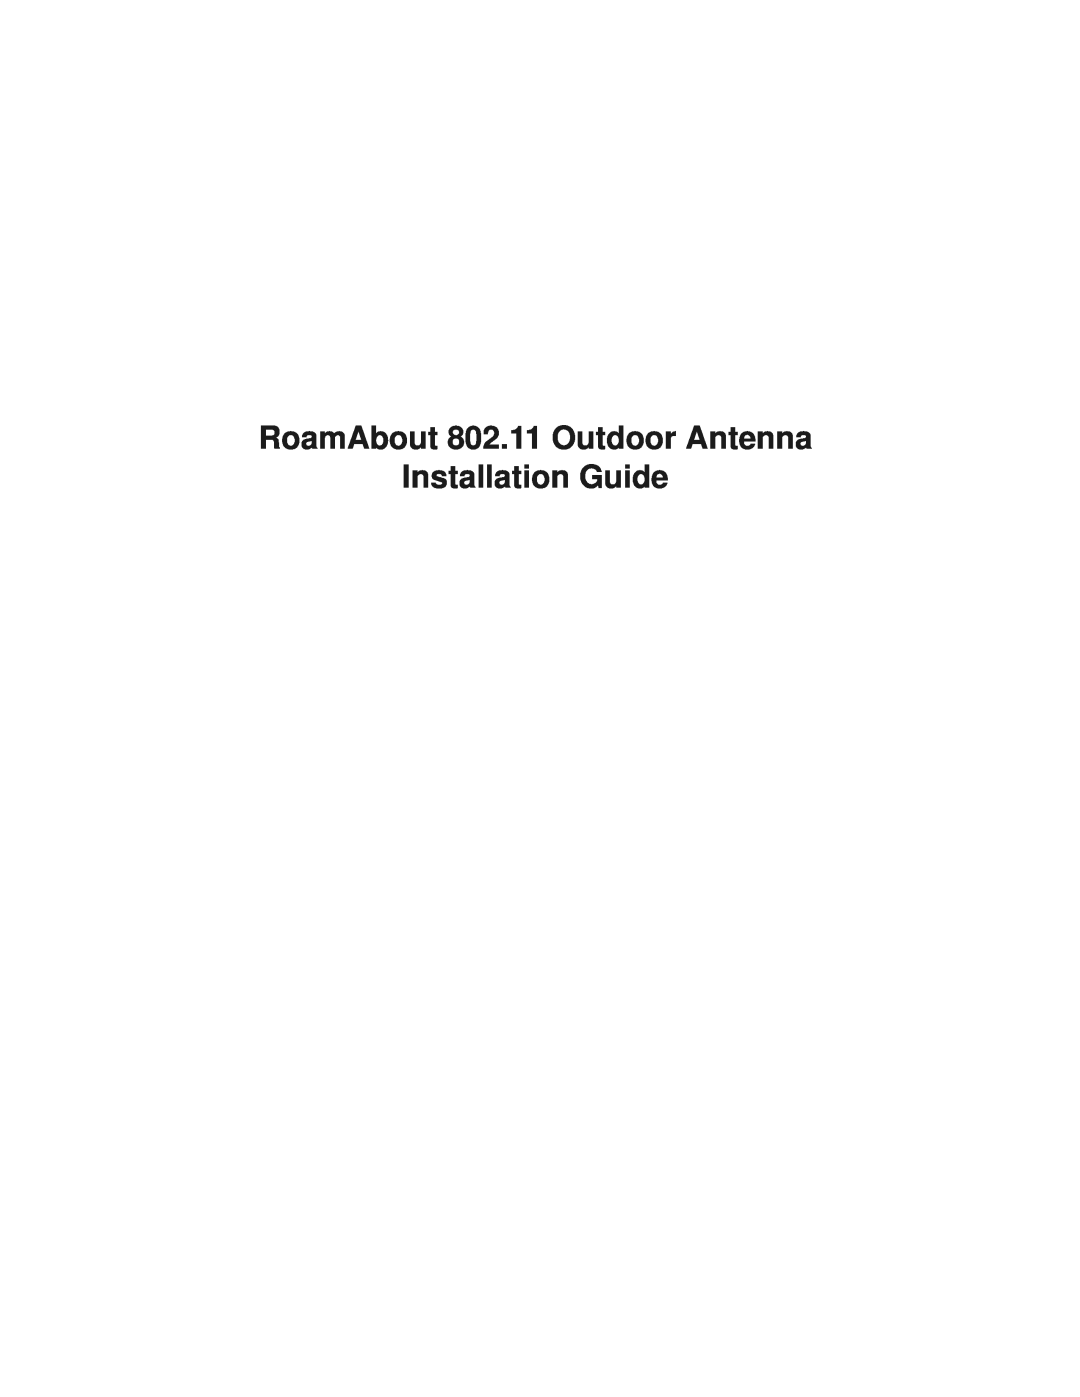 Cabletron Systems 9033073 manual RoamAbout 802.11 Outdoor Antenna, Installation Guide 